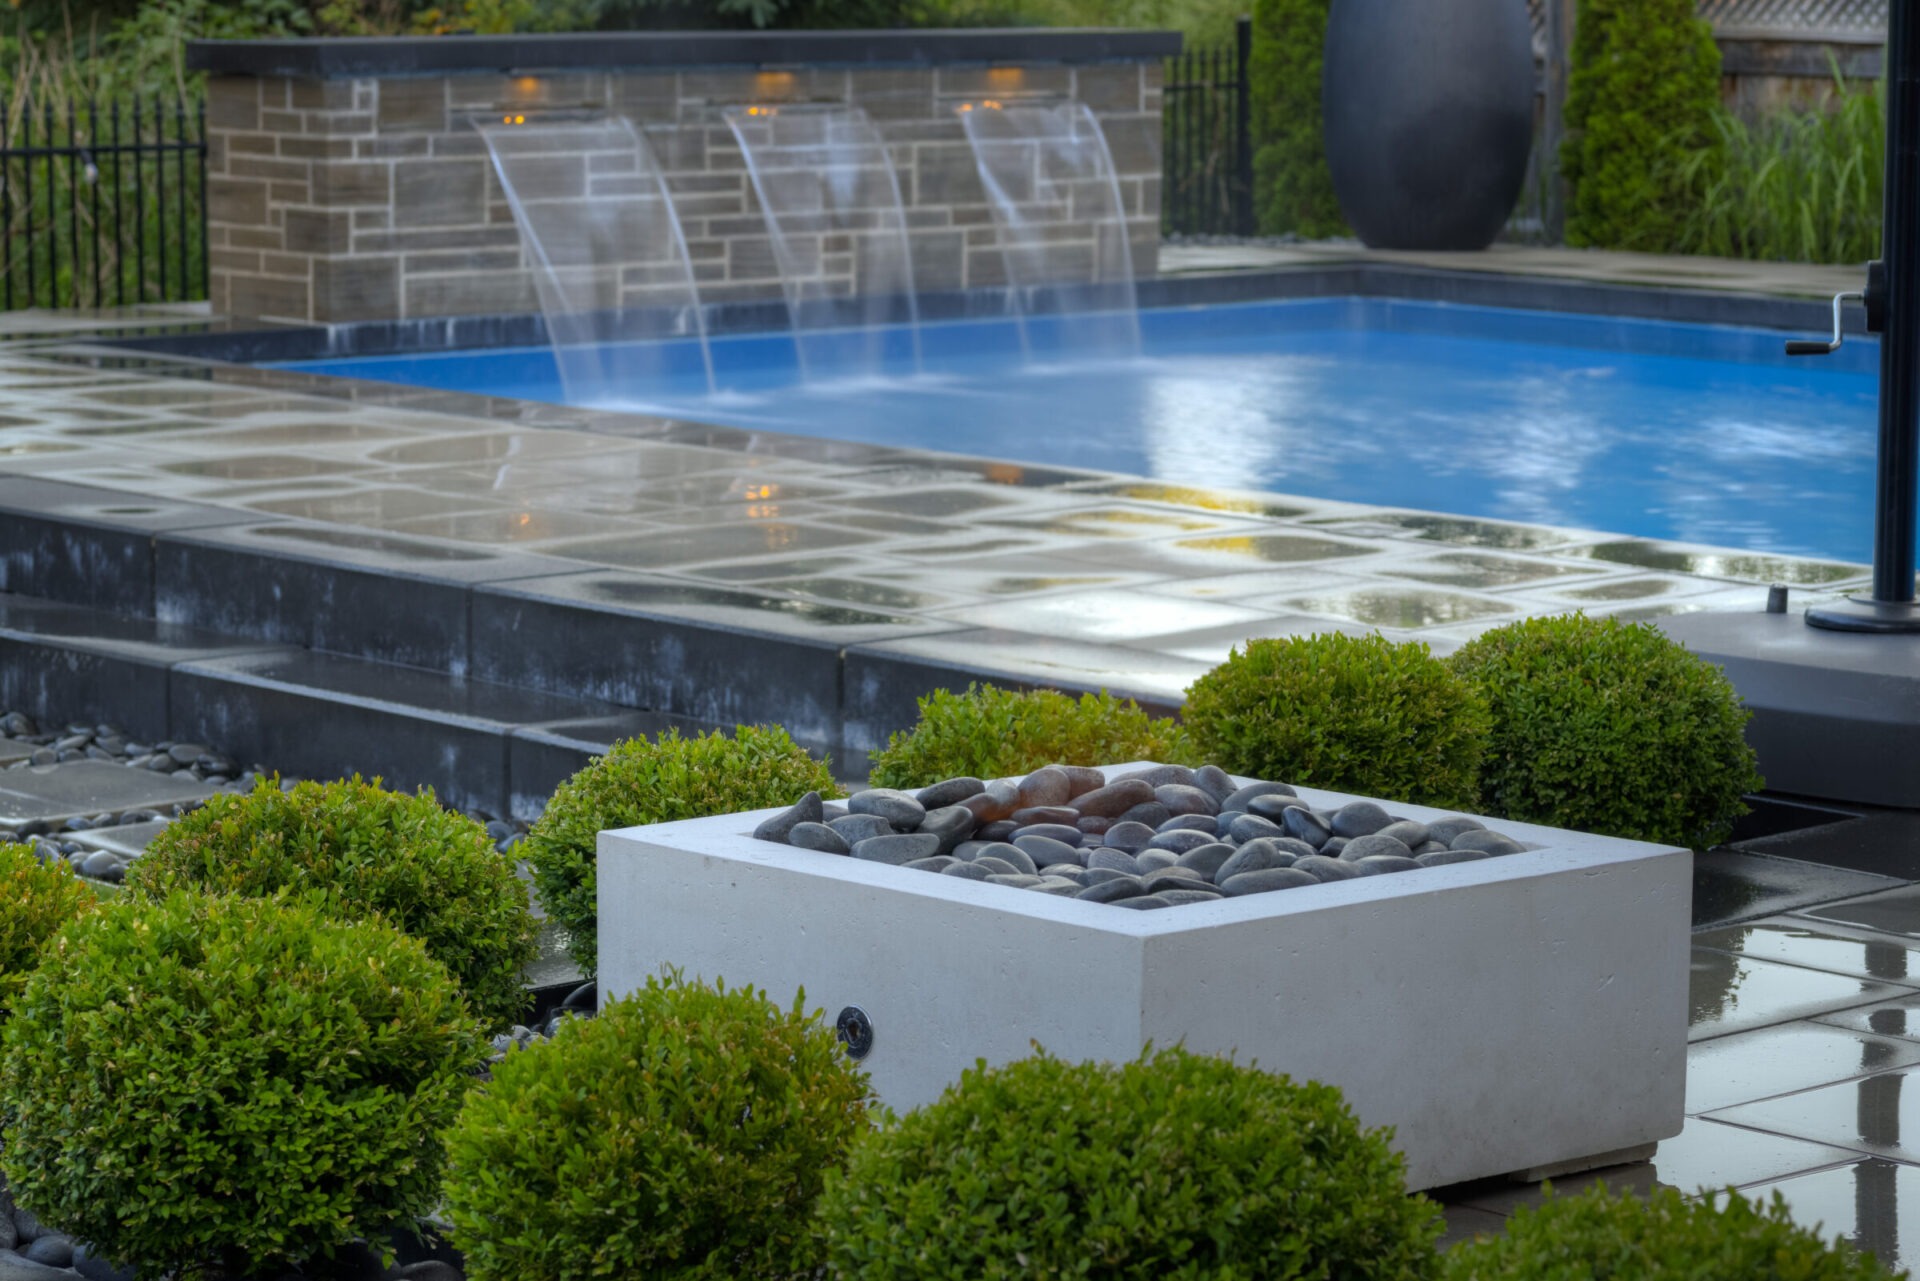 A serene outdoor area featuring a blue swimming pool with water fountains, surrounded by lush green shrubs and smooth grey stones in foreground.